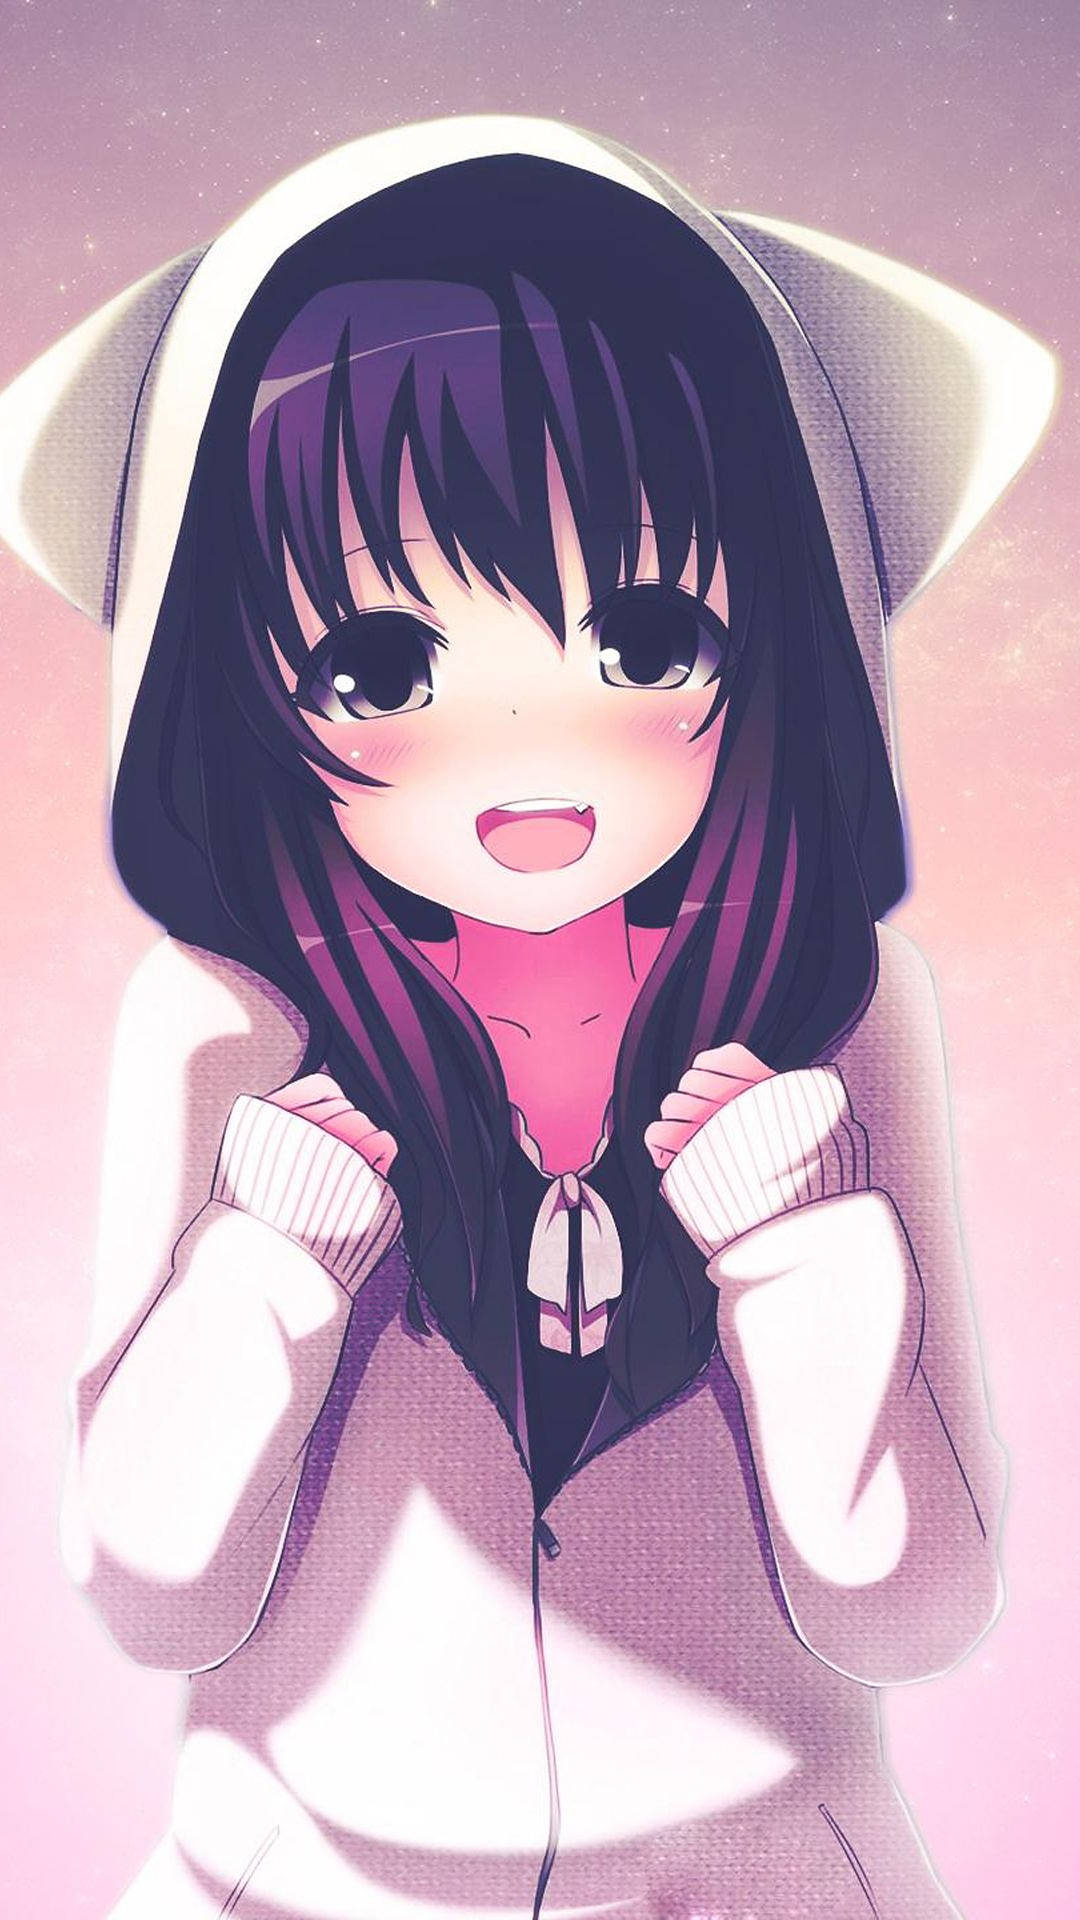 Download Cute Anime Loli IPhone Wallpaper | Wallpapers.com